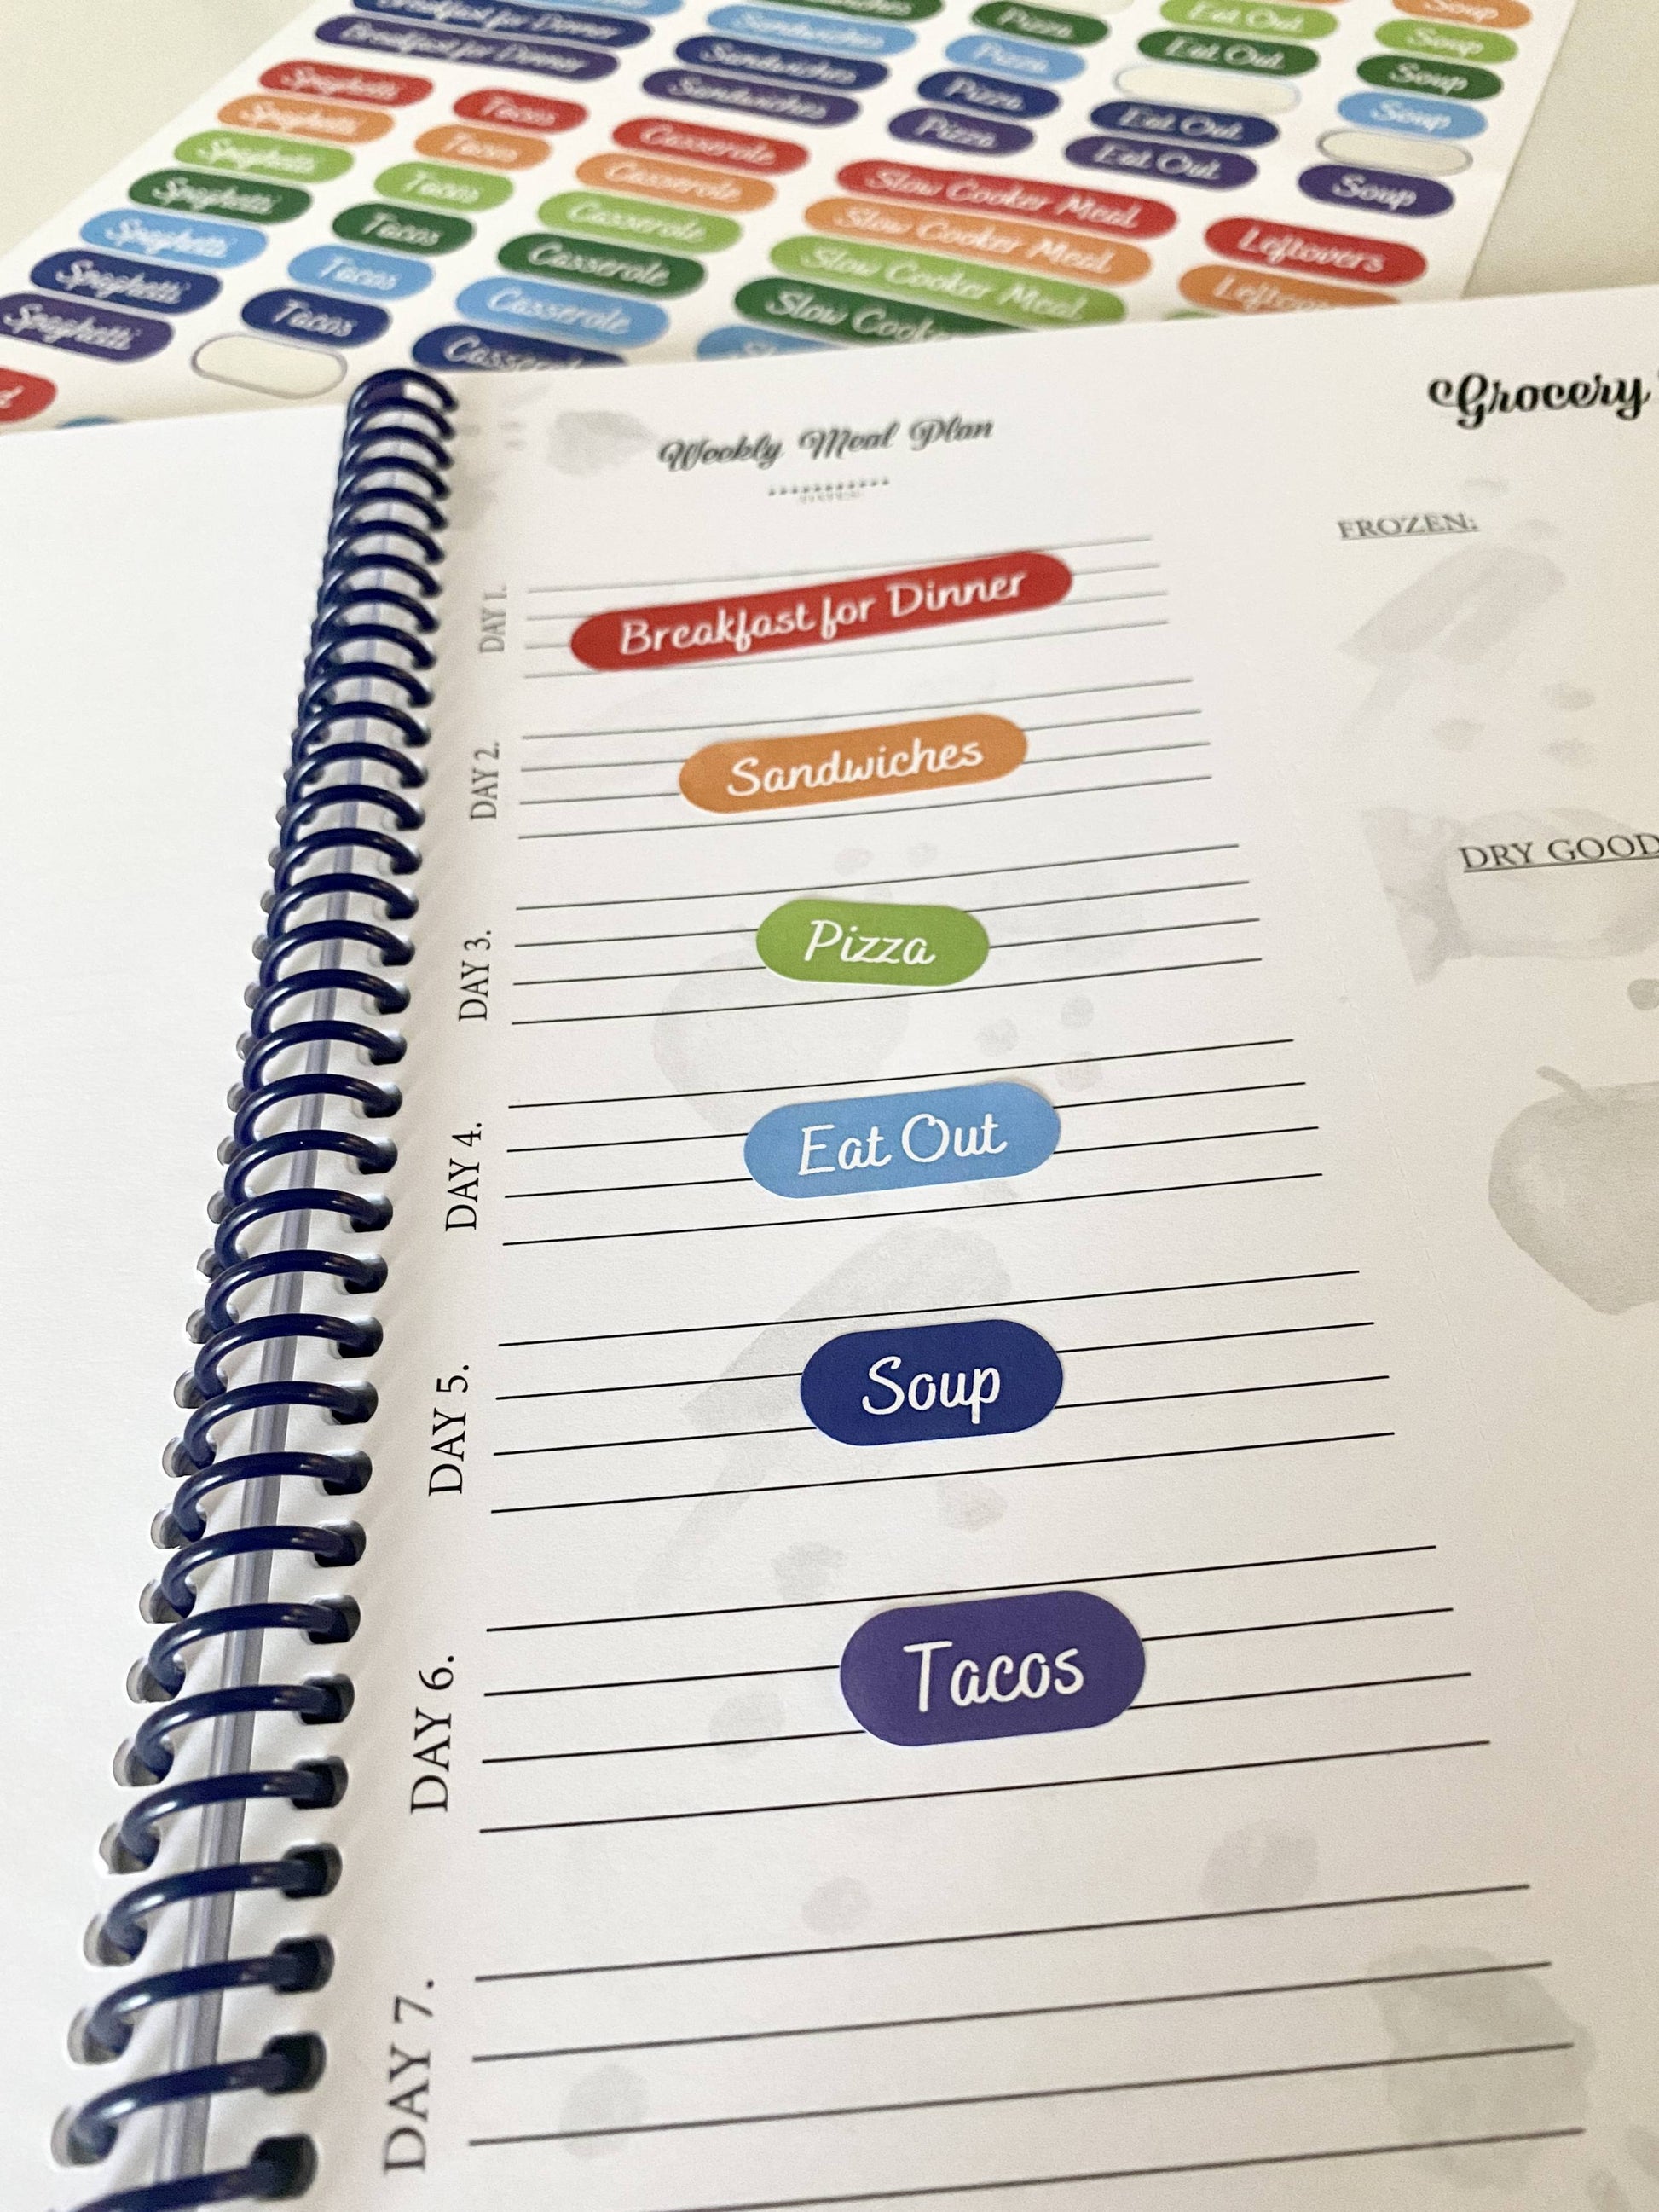 Best Selling Simple Purposeful Living 52 week meal planner meal planning spiral bound notebook with tear off grocery list.  In addition, mealp idea stickers help simplify weekly meal planing.